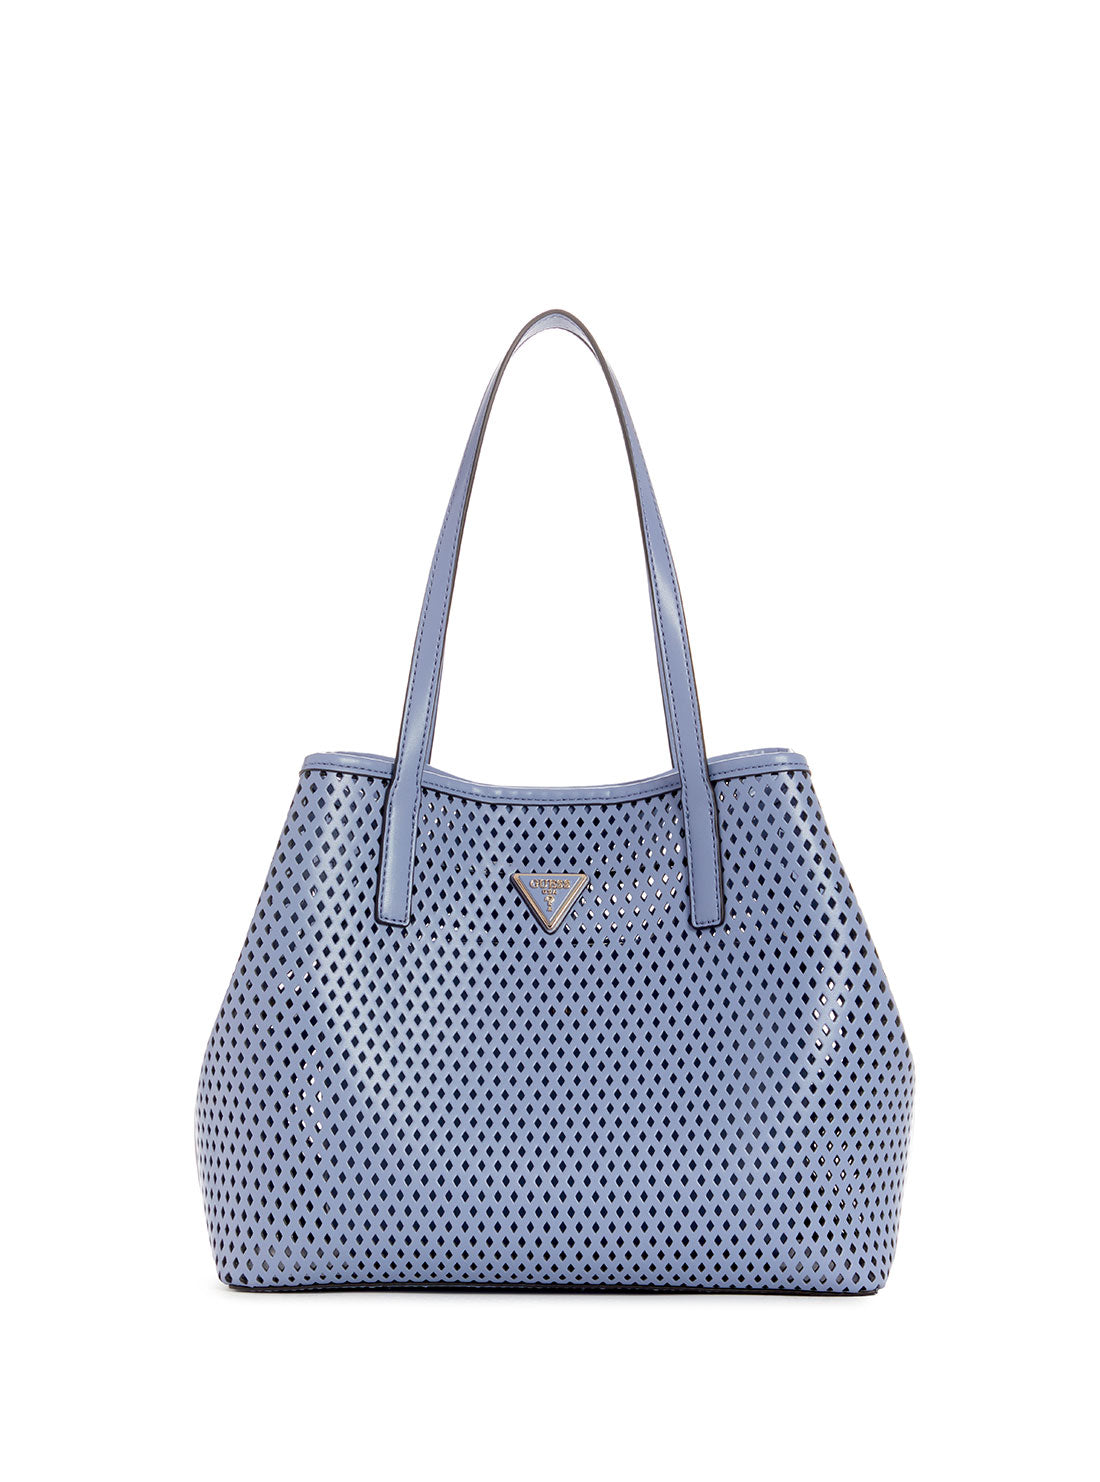 GUESS Women's Wisteria Woven Vikky Tote Bag WP699523 Front View